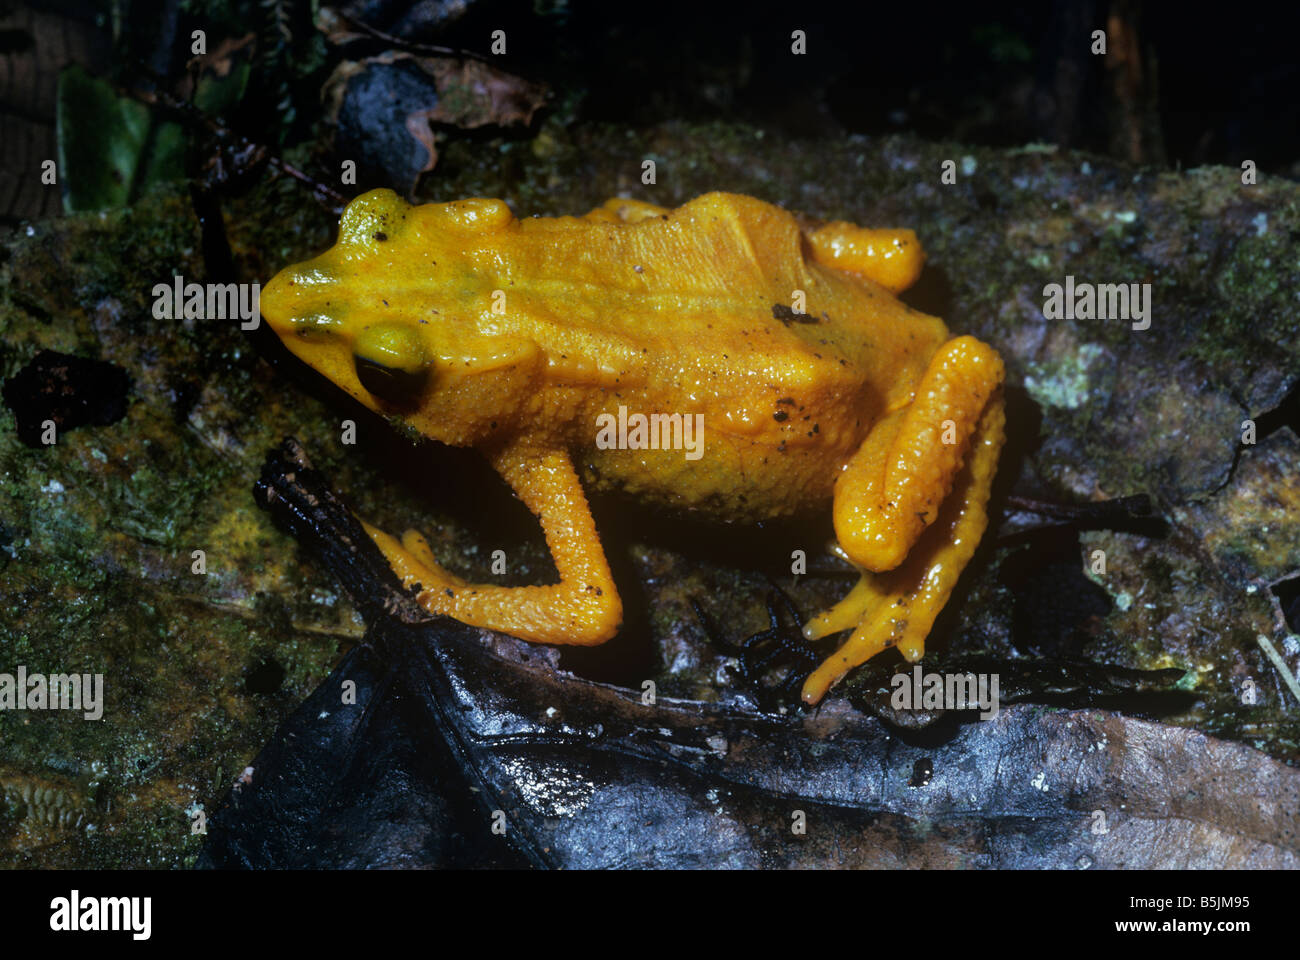 Yellow harlequin frog actually a toad Atelopus oxyrhynchus Bufonidae a warningly colored diurnal species in rainforest Venezuela Stock Photo